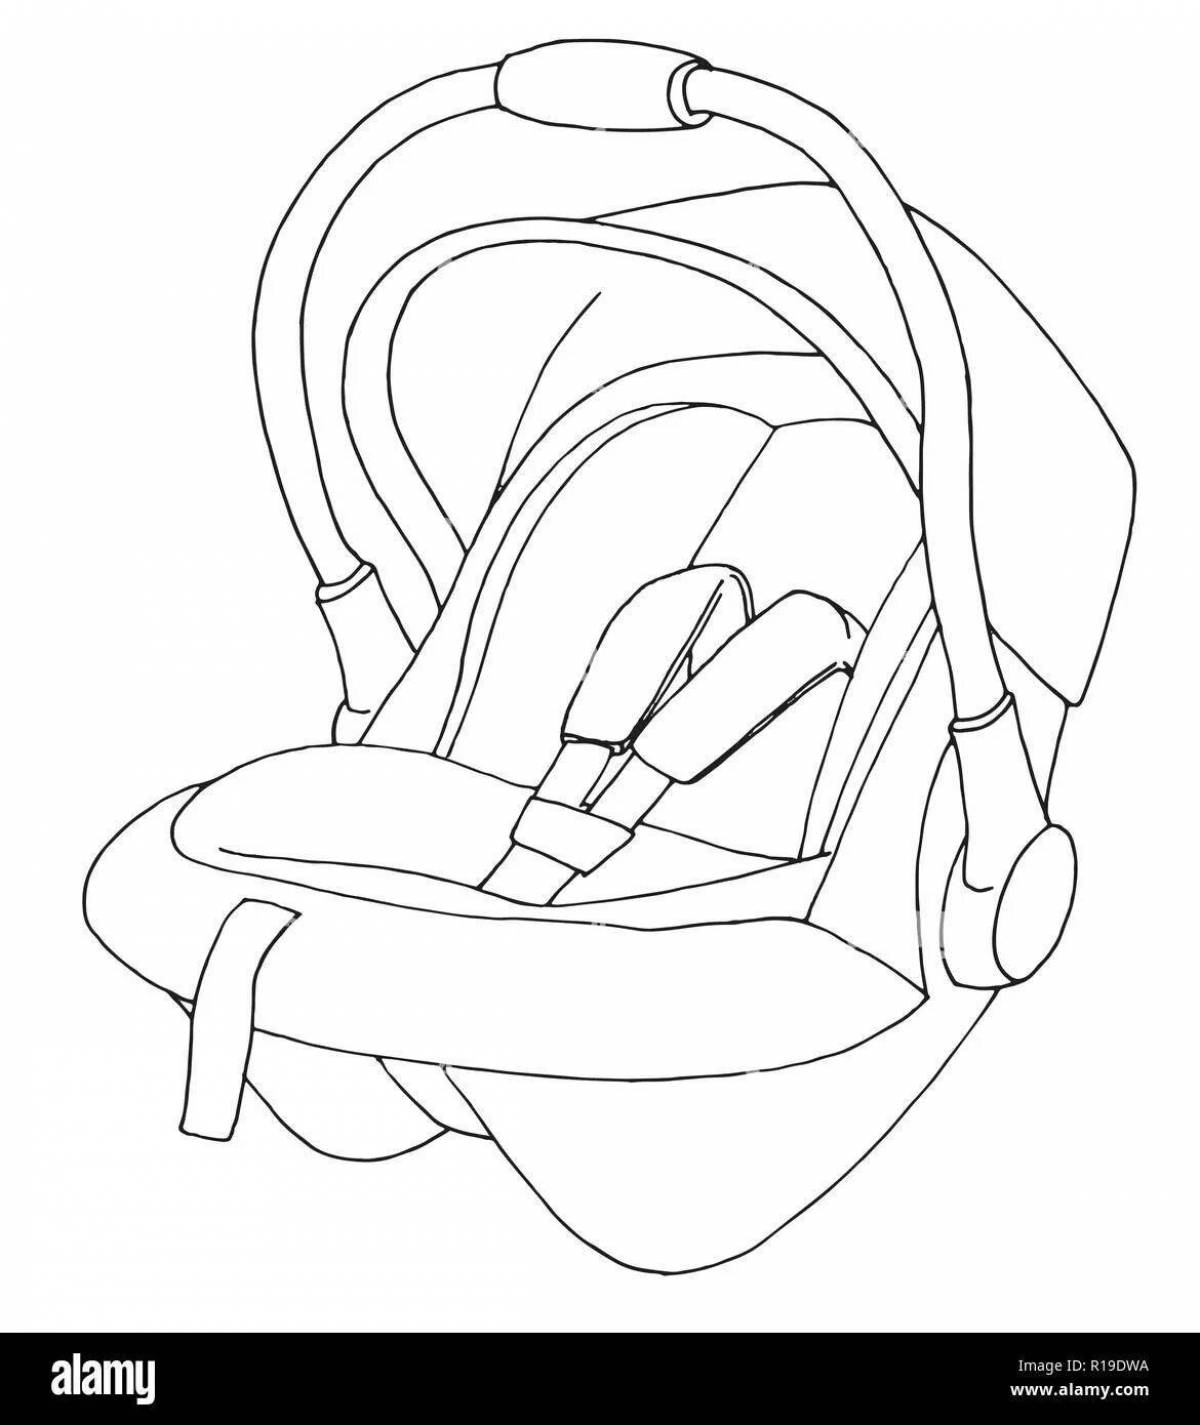 Creative coloring page of car seat for kids